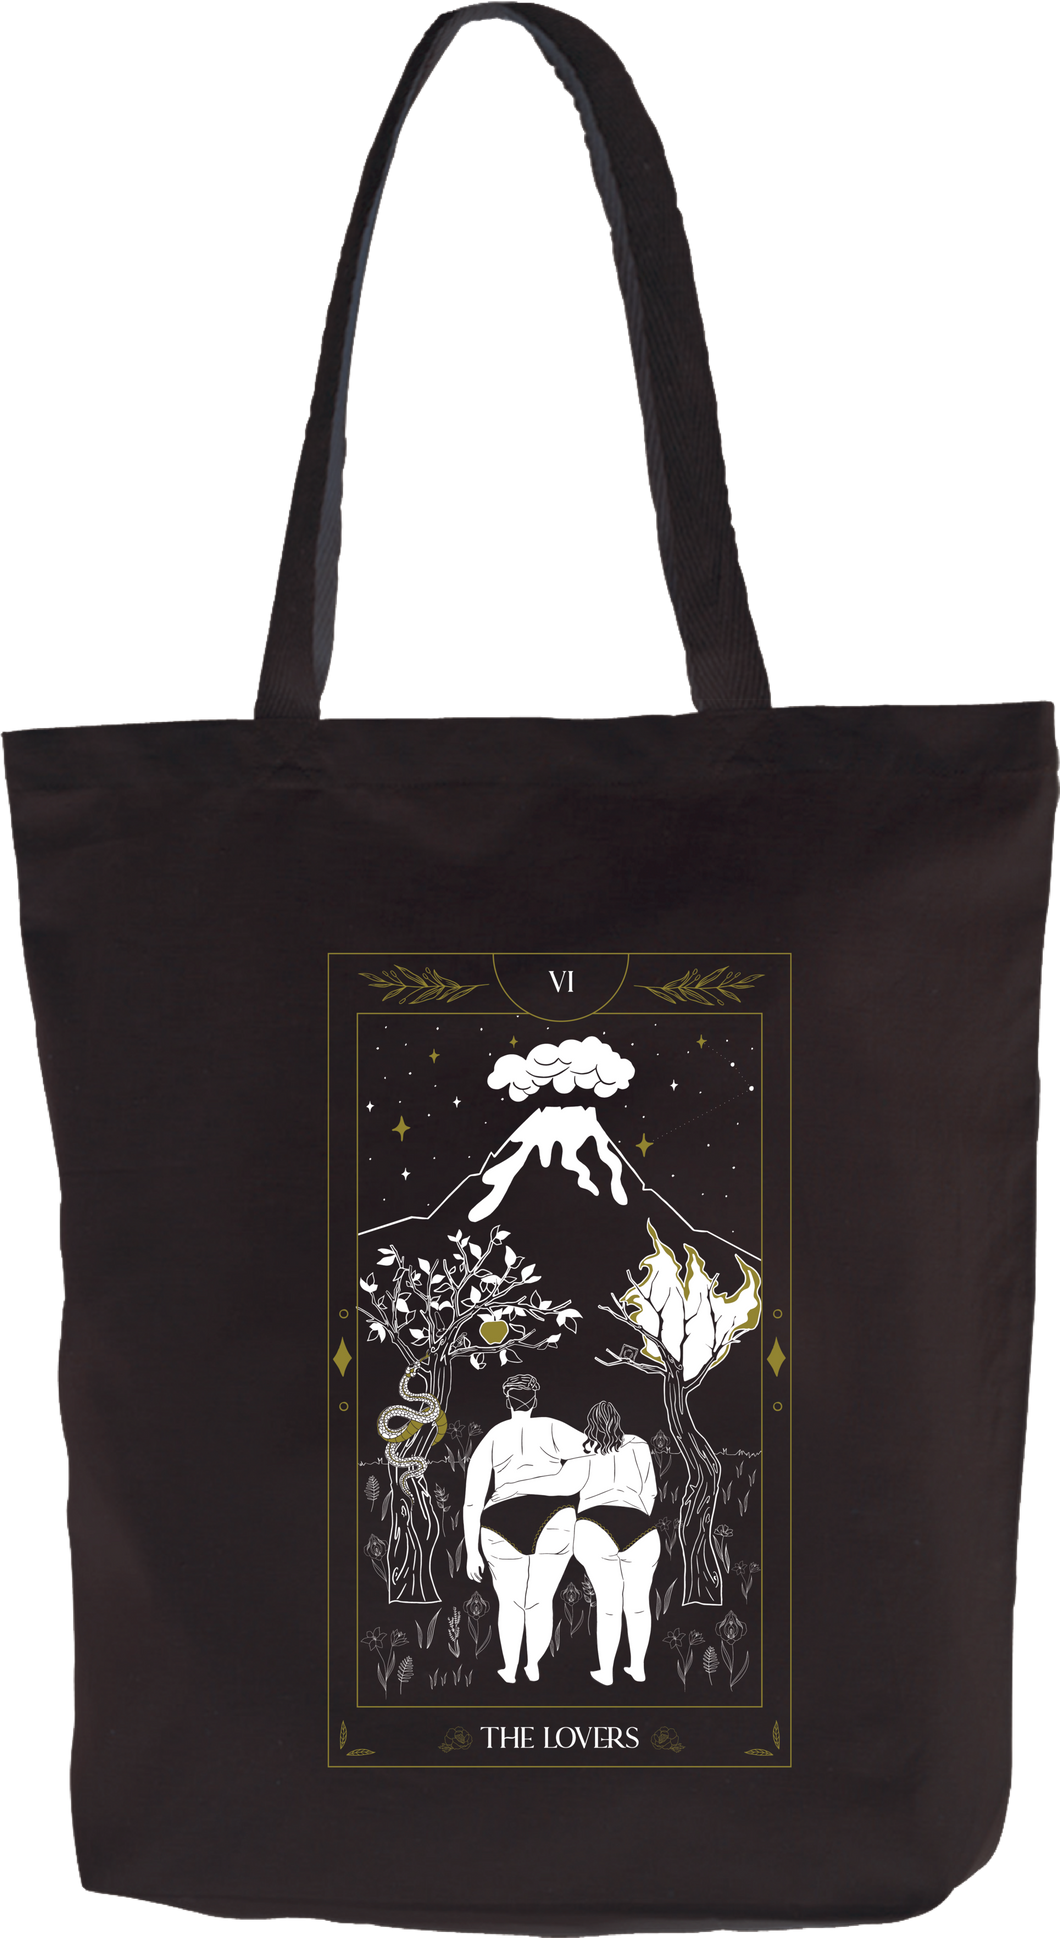 The Lovers Tote